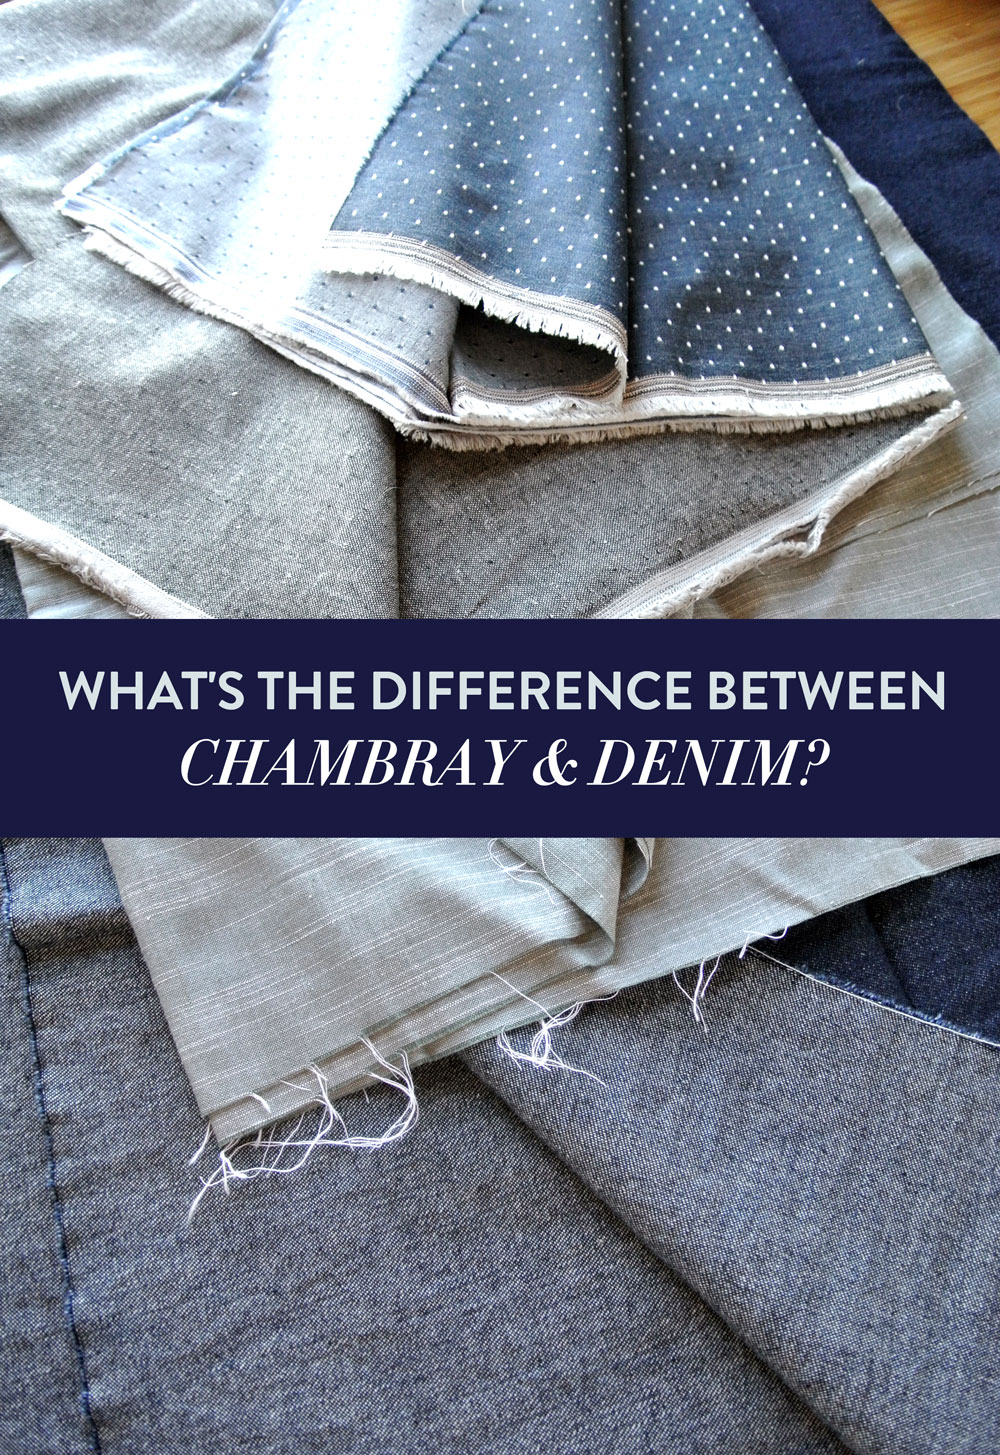 https://suzyquilts.com/whats-the-difference-between-chambray-and-denim/